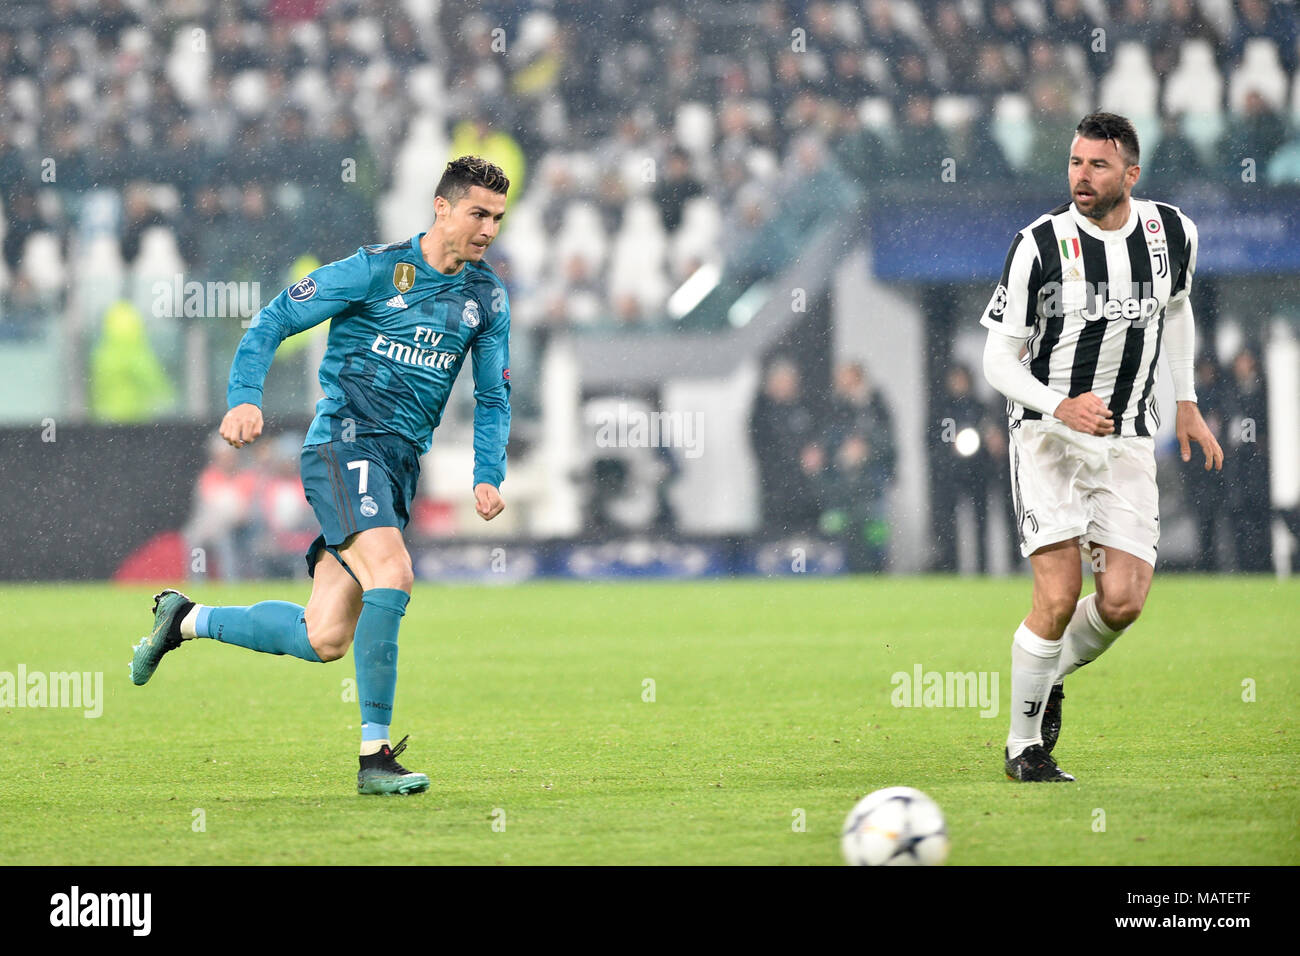 Turin, Italy. 3rd Apr, 2018. Cristiano Ronaldo (Real Madrid Club de  Fútbol), Andrea Barzagli (Juventus FC), during the UEFA Champions League  quarter-finals 1st leg football match between Juventus FC and Real Madrid